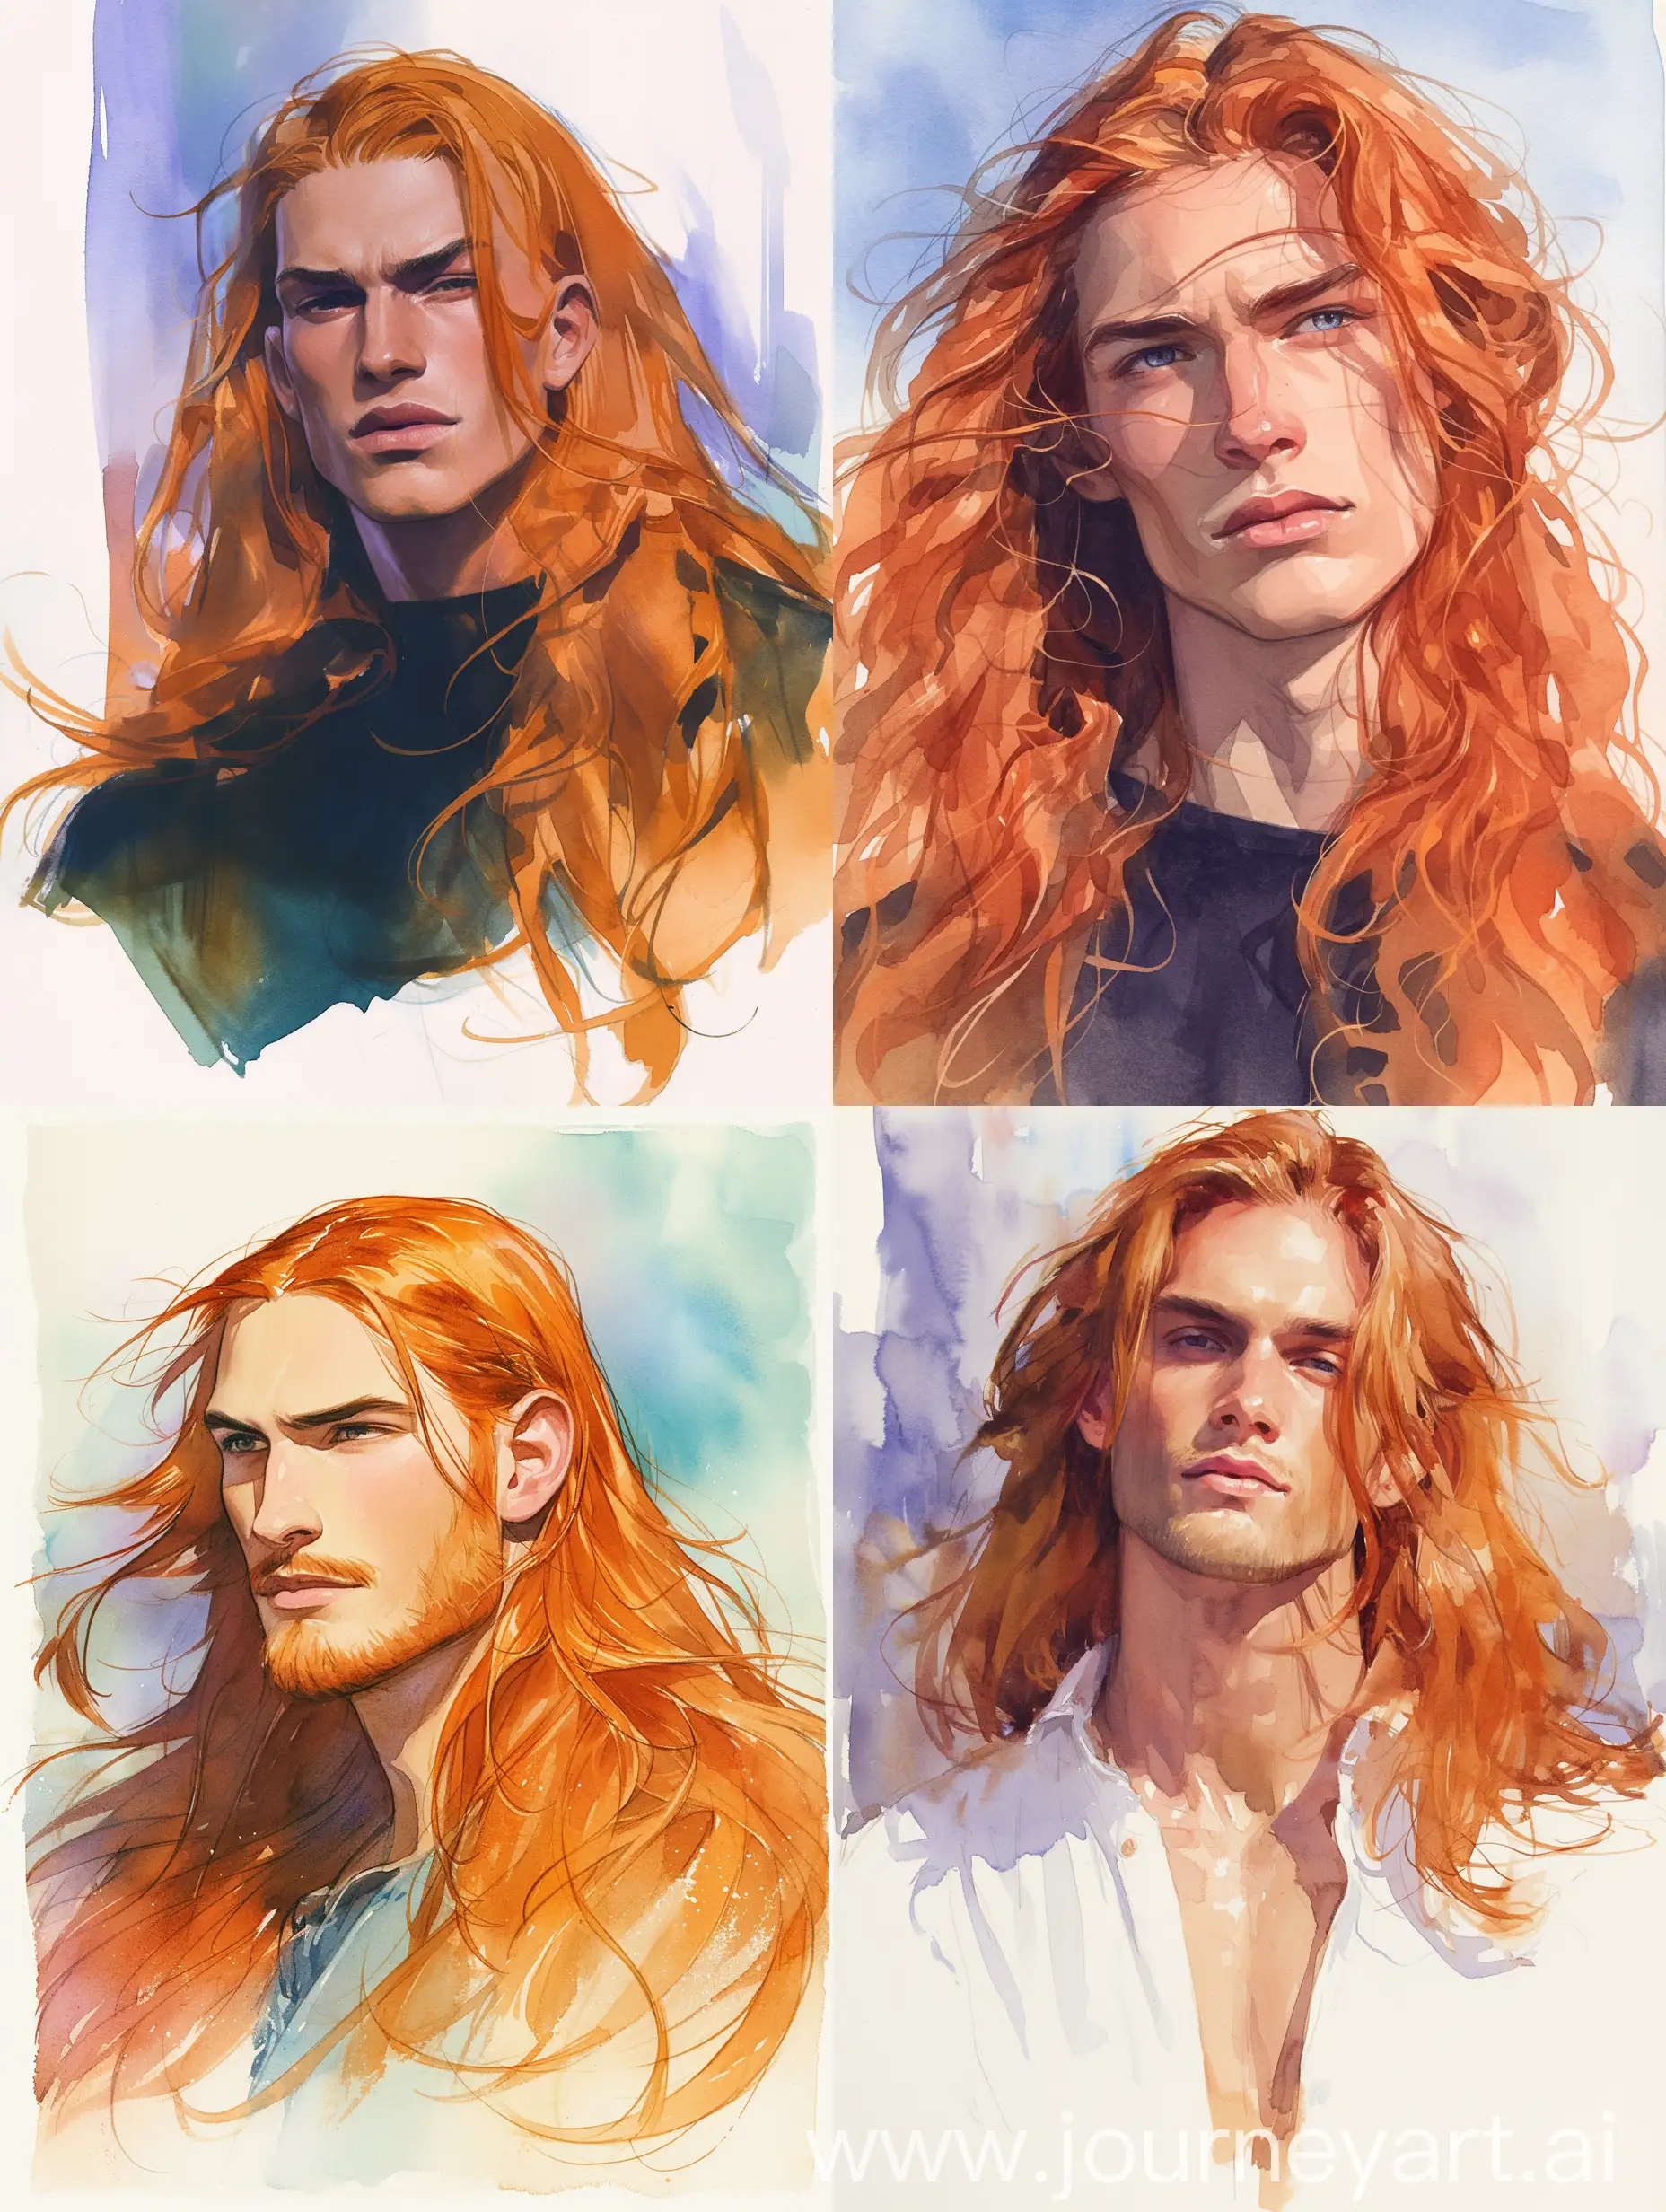 Vibrant-Male-Portrait-with-Long-Orange-Hair-on-Colorful-Watercolor-Background